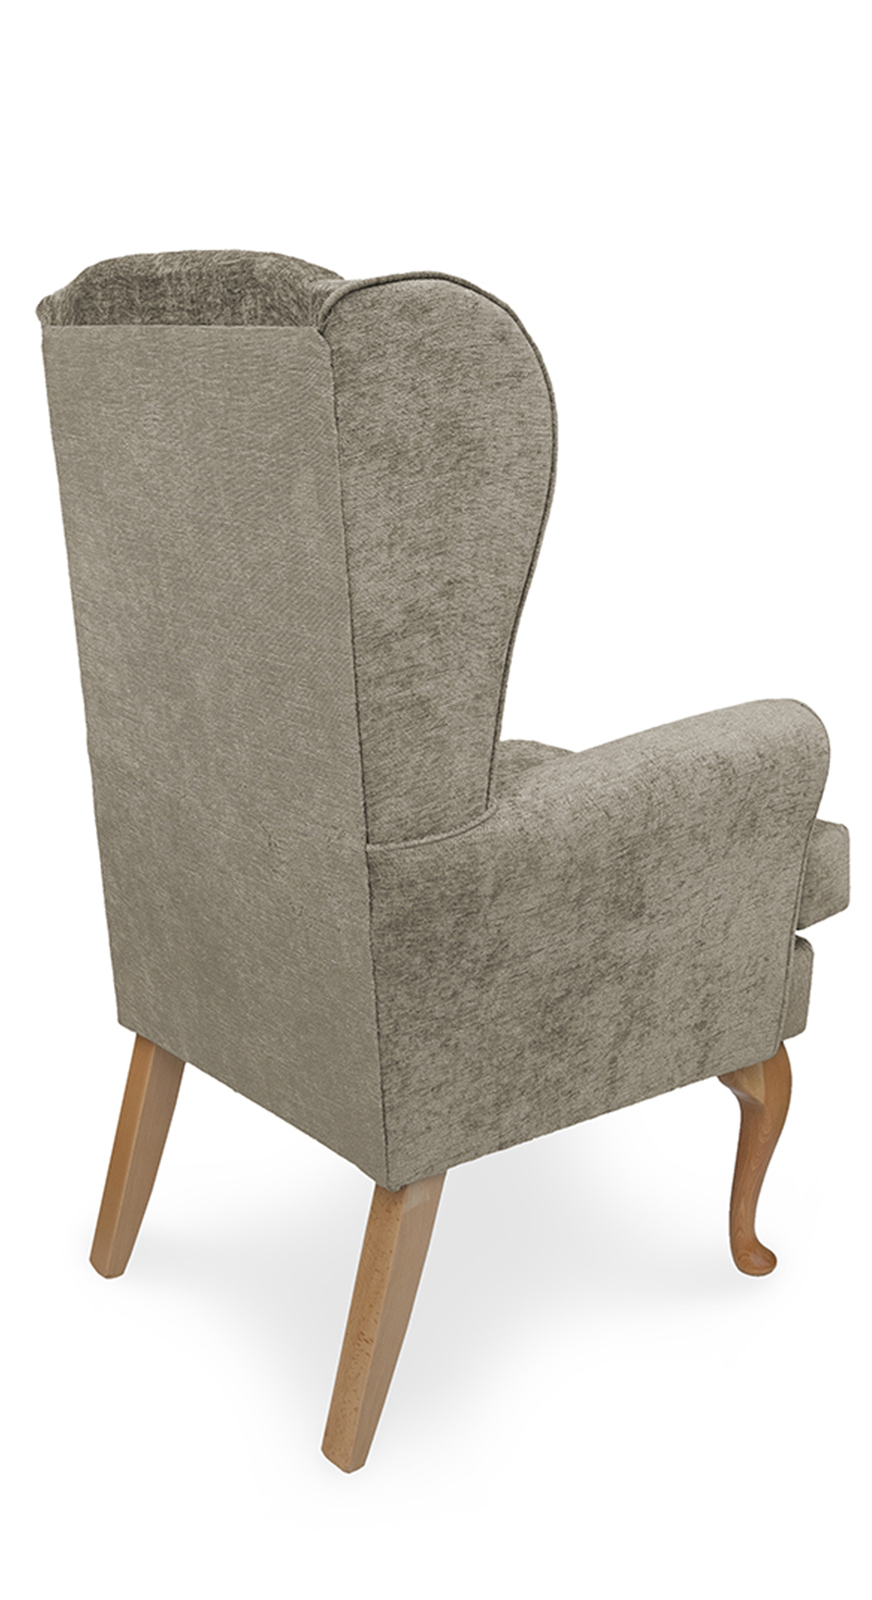 Mawcare - The Buckingham - high seat orthopedic Wingback fireside  Armchair in Darcy fawn, Stain Resistant Finish, Waterproof, Breathable, Anti-microbial